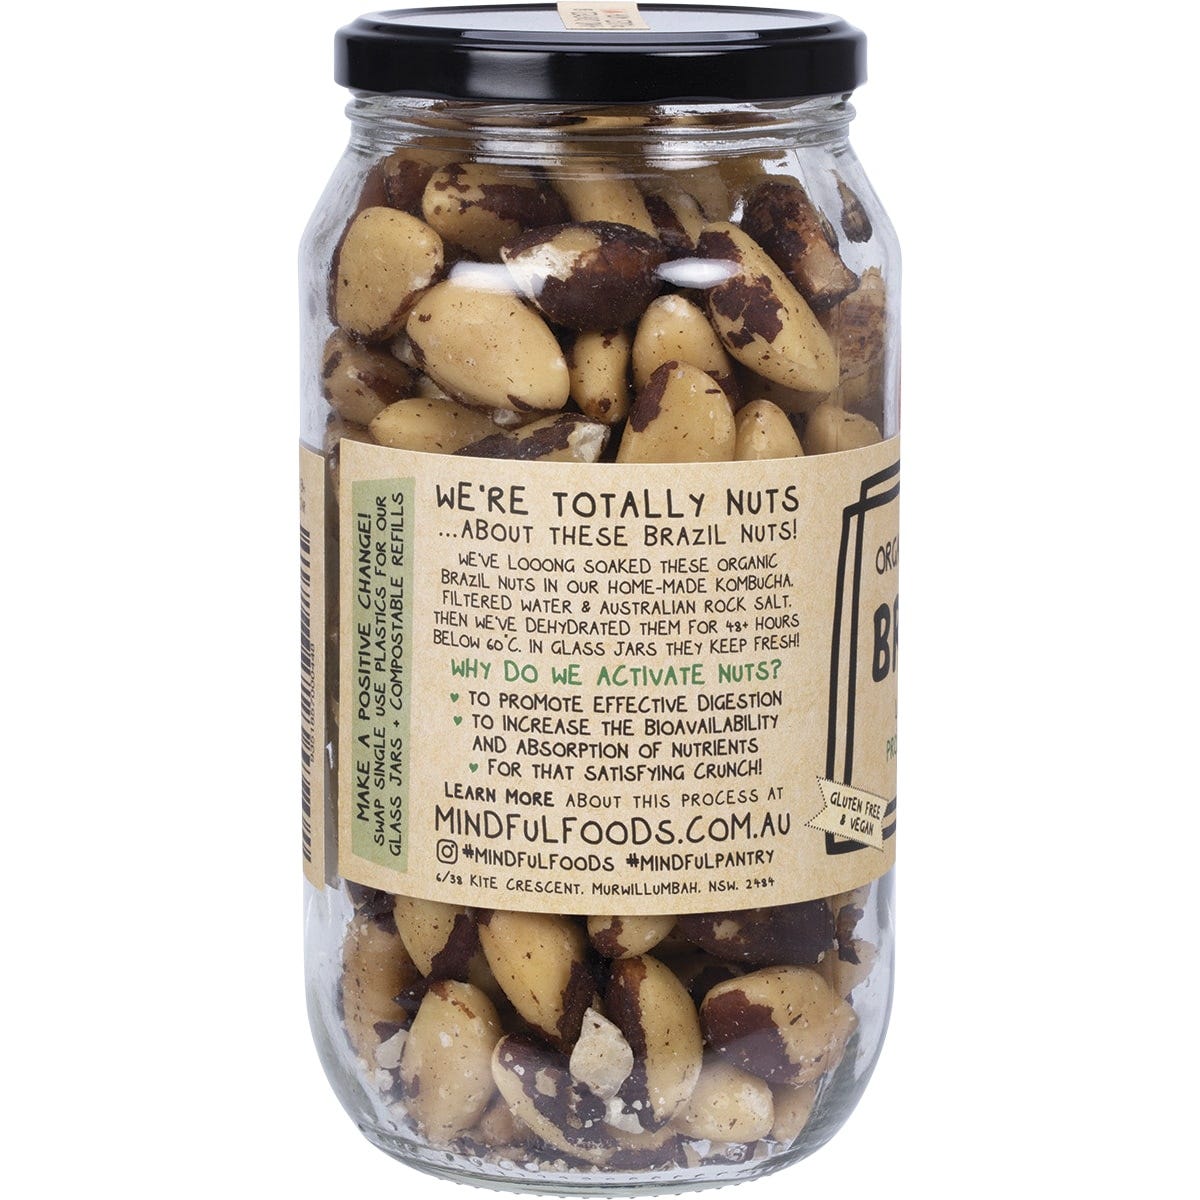 Mindful Foods Brazil Nuts Organic & Activated